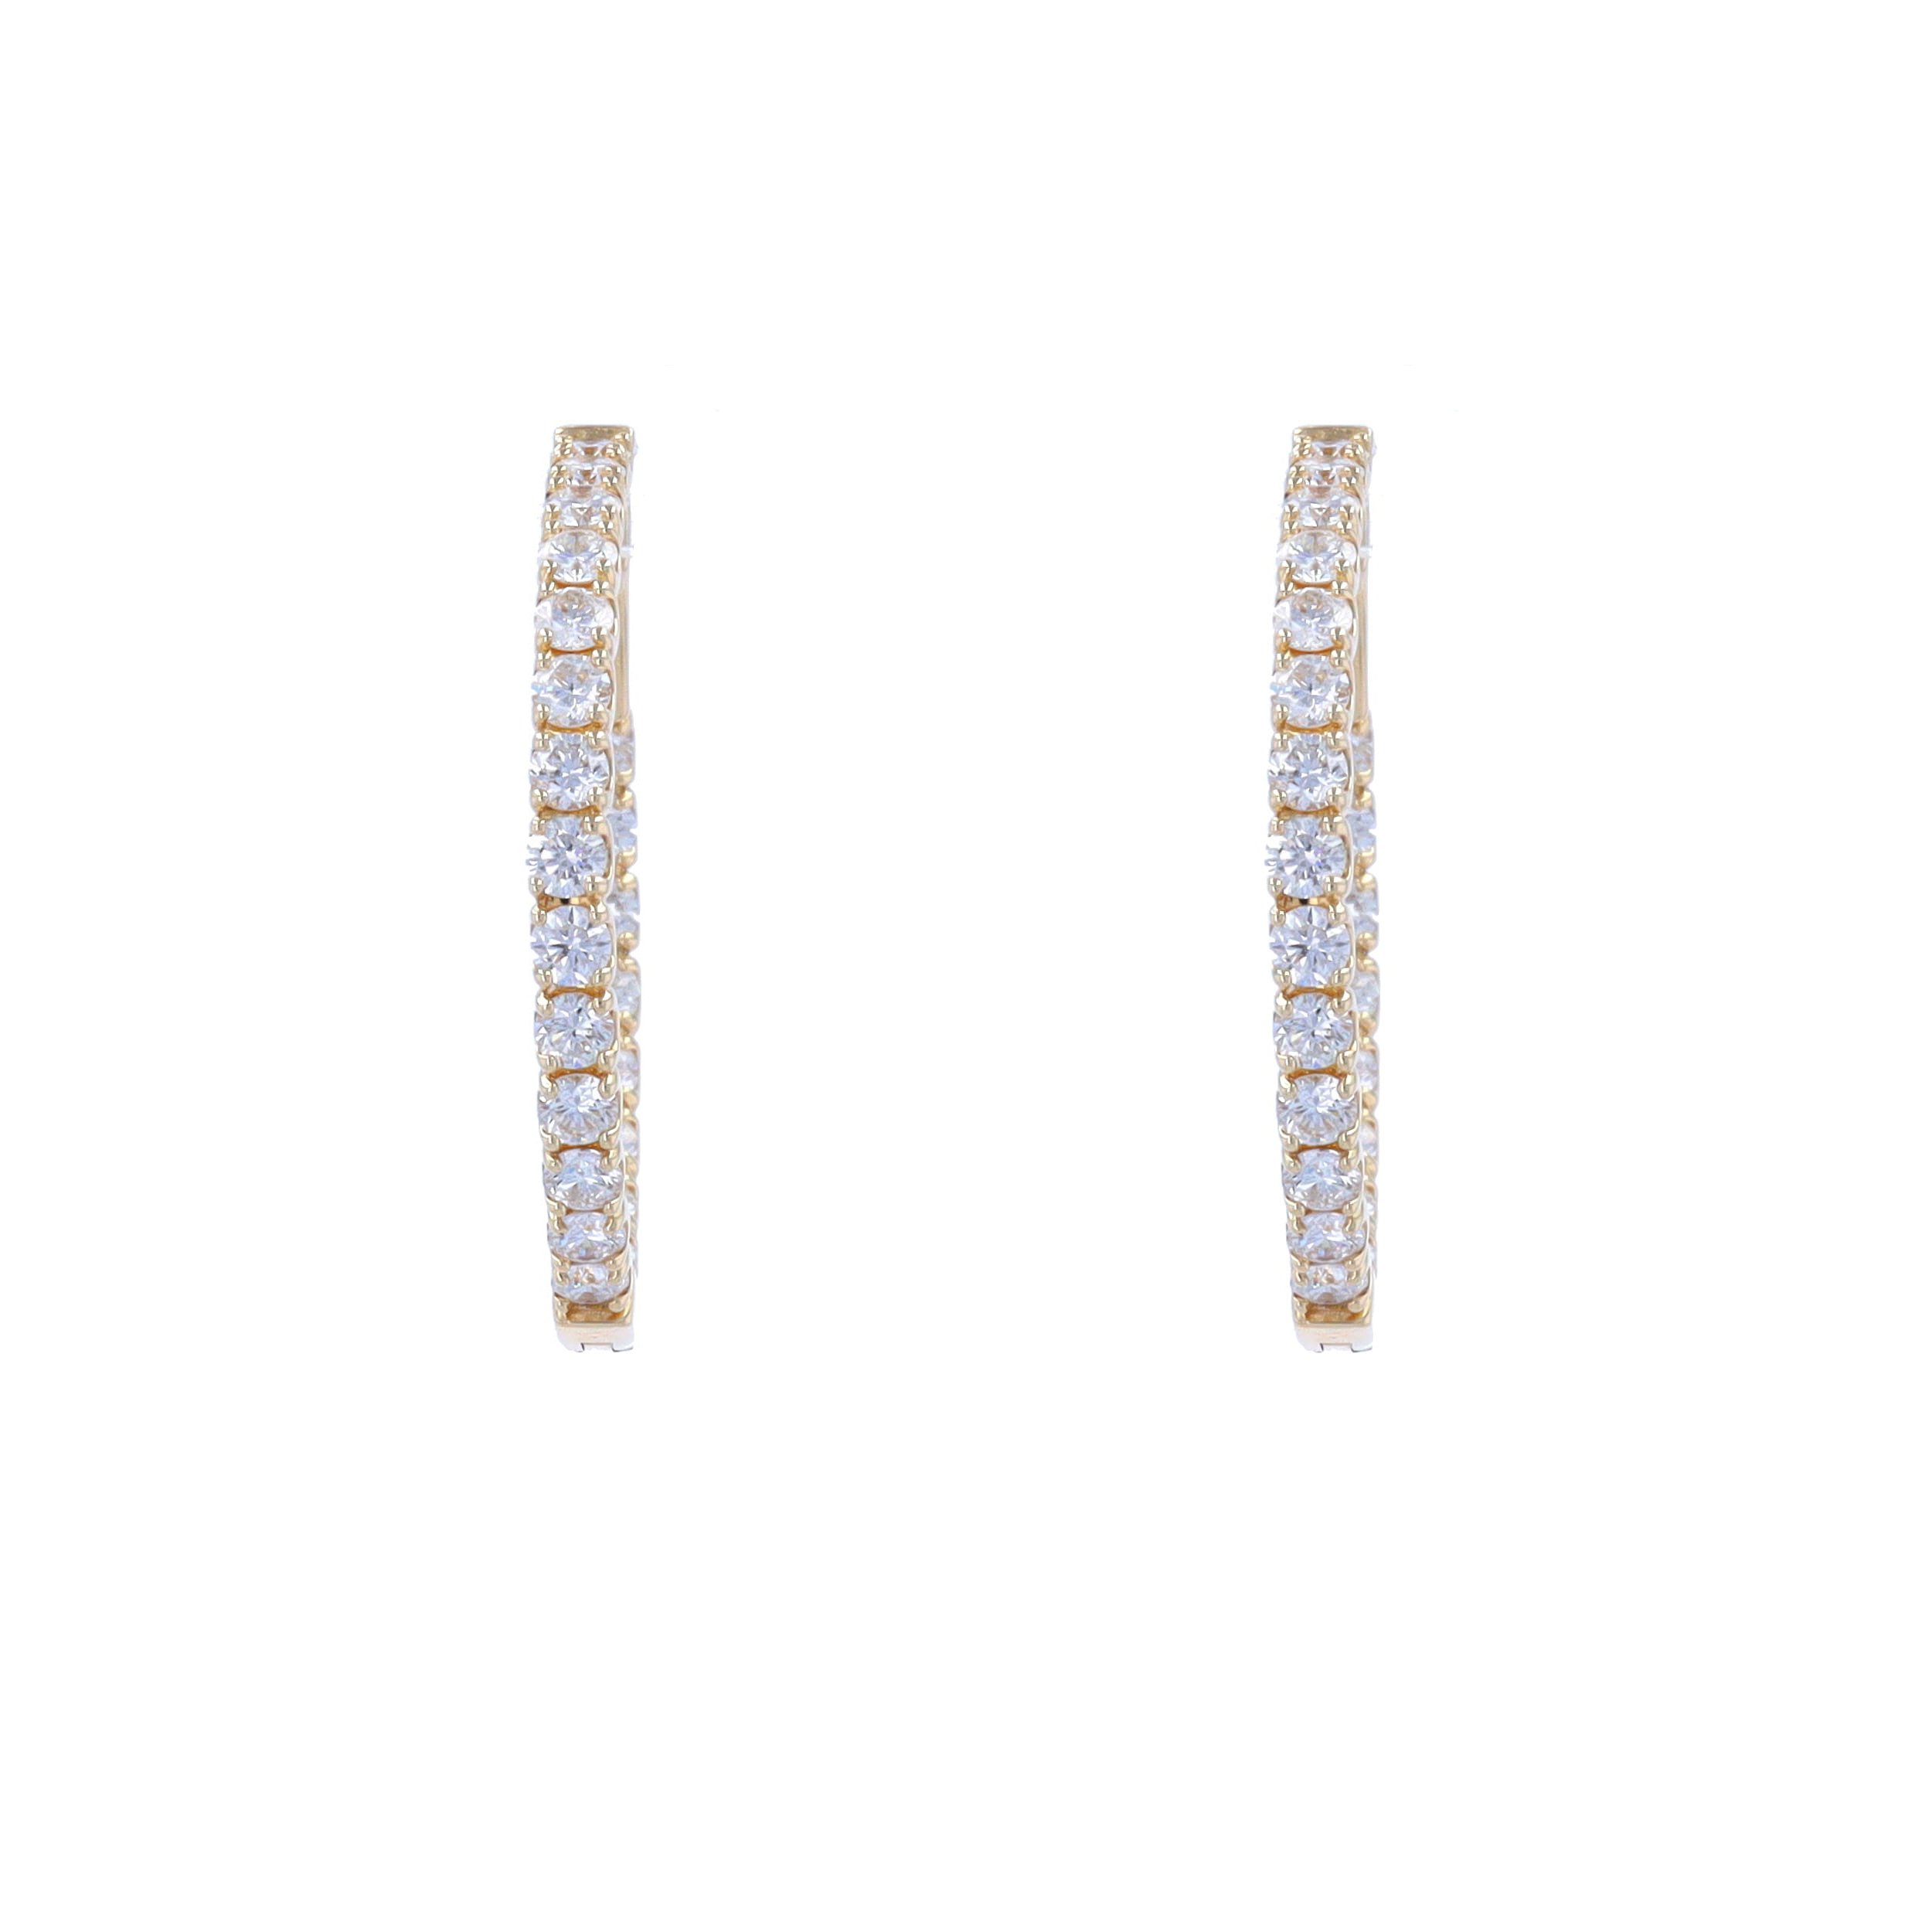 14k Yellow Gold Round Hoop Earrings With 2.9tcw Of Pave Diamonds